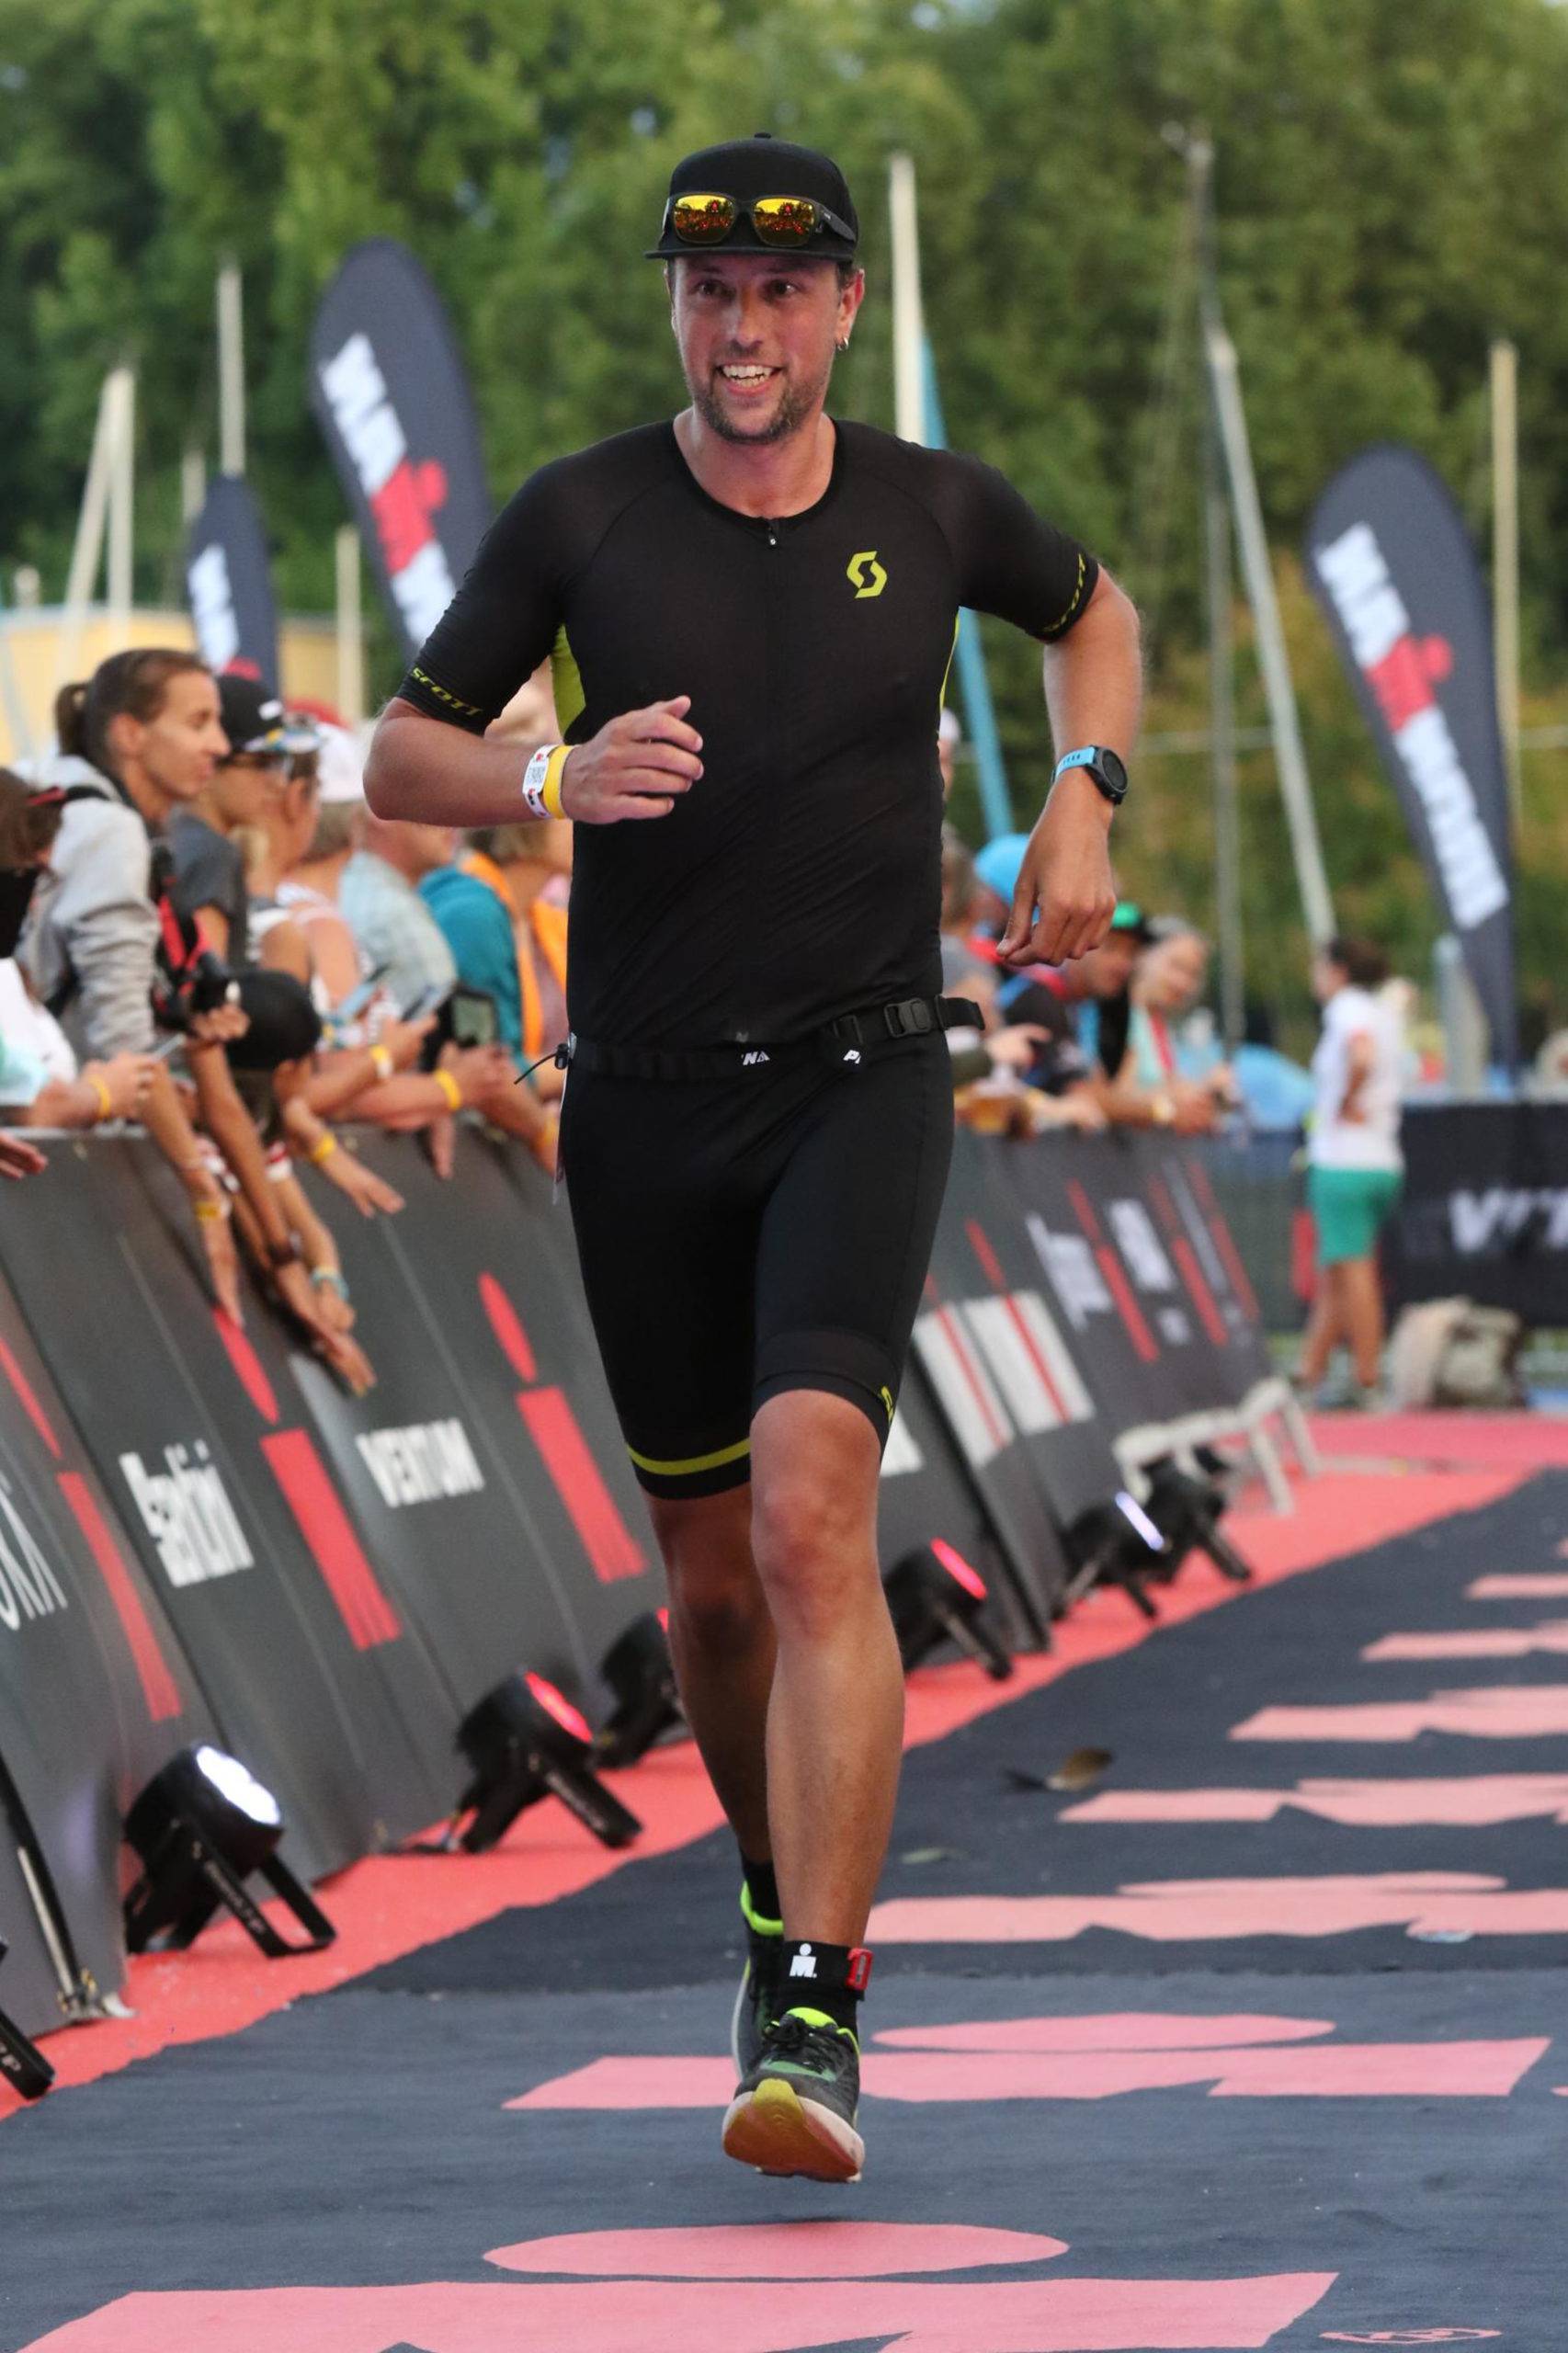 Last steps on the Ironman carpet, all smiling